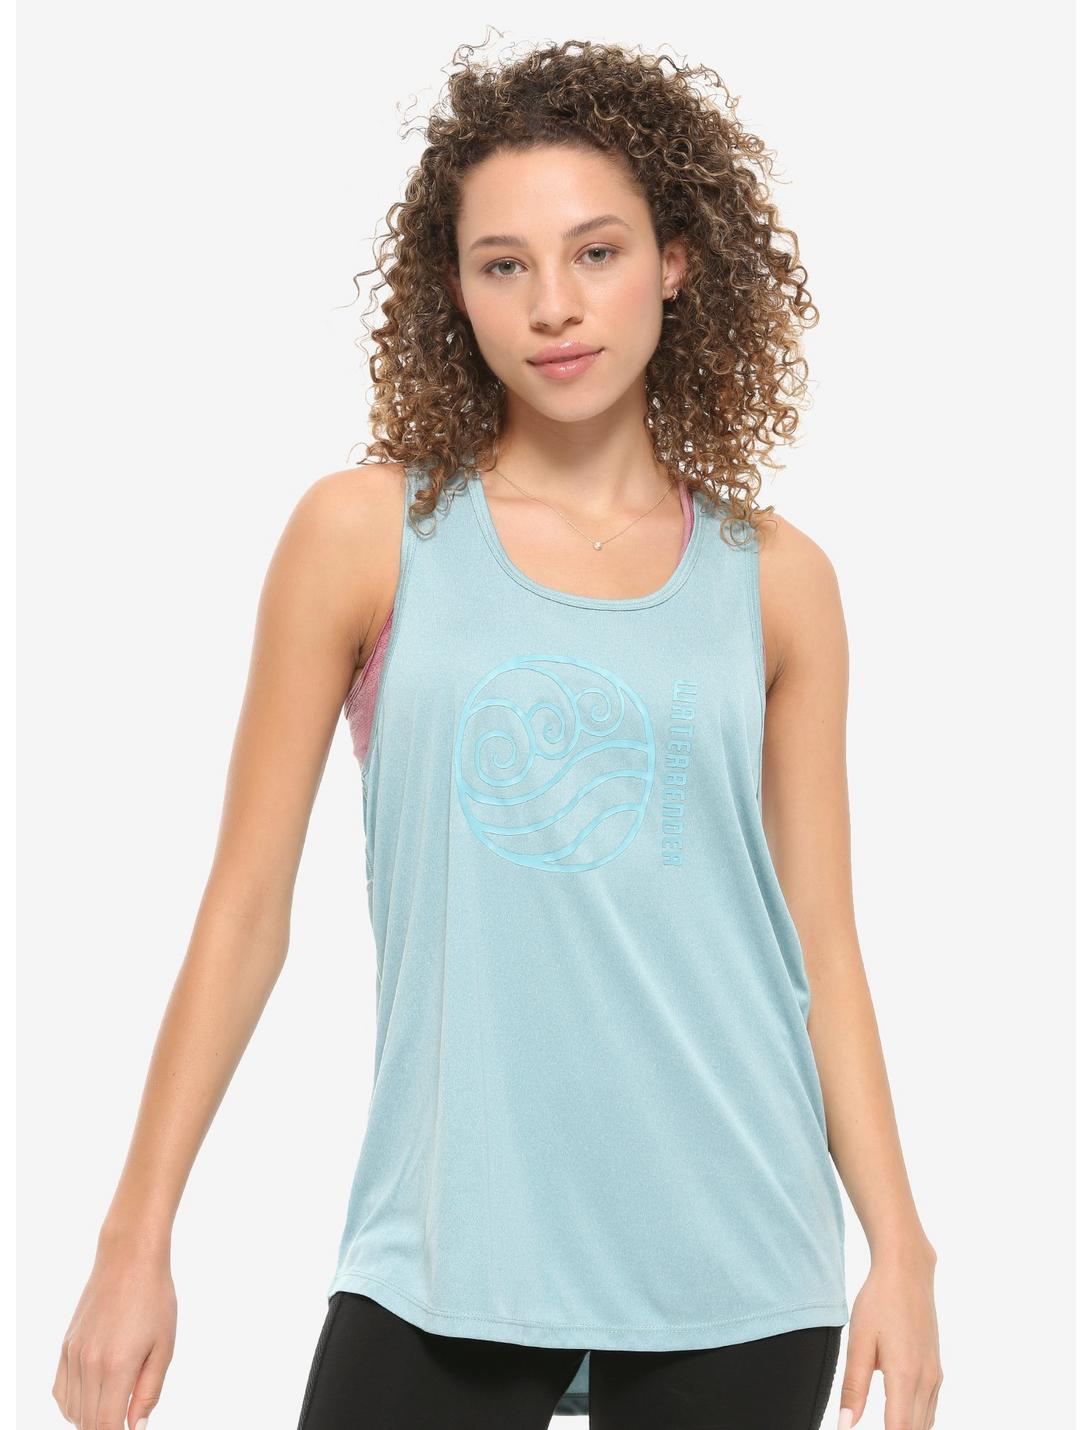 Avatar: The Last Airbender Water Tribe Women's Active Tank Top - BoxLunch Exclusive, BLUE, hi-res